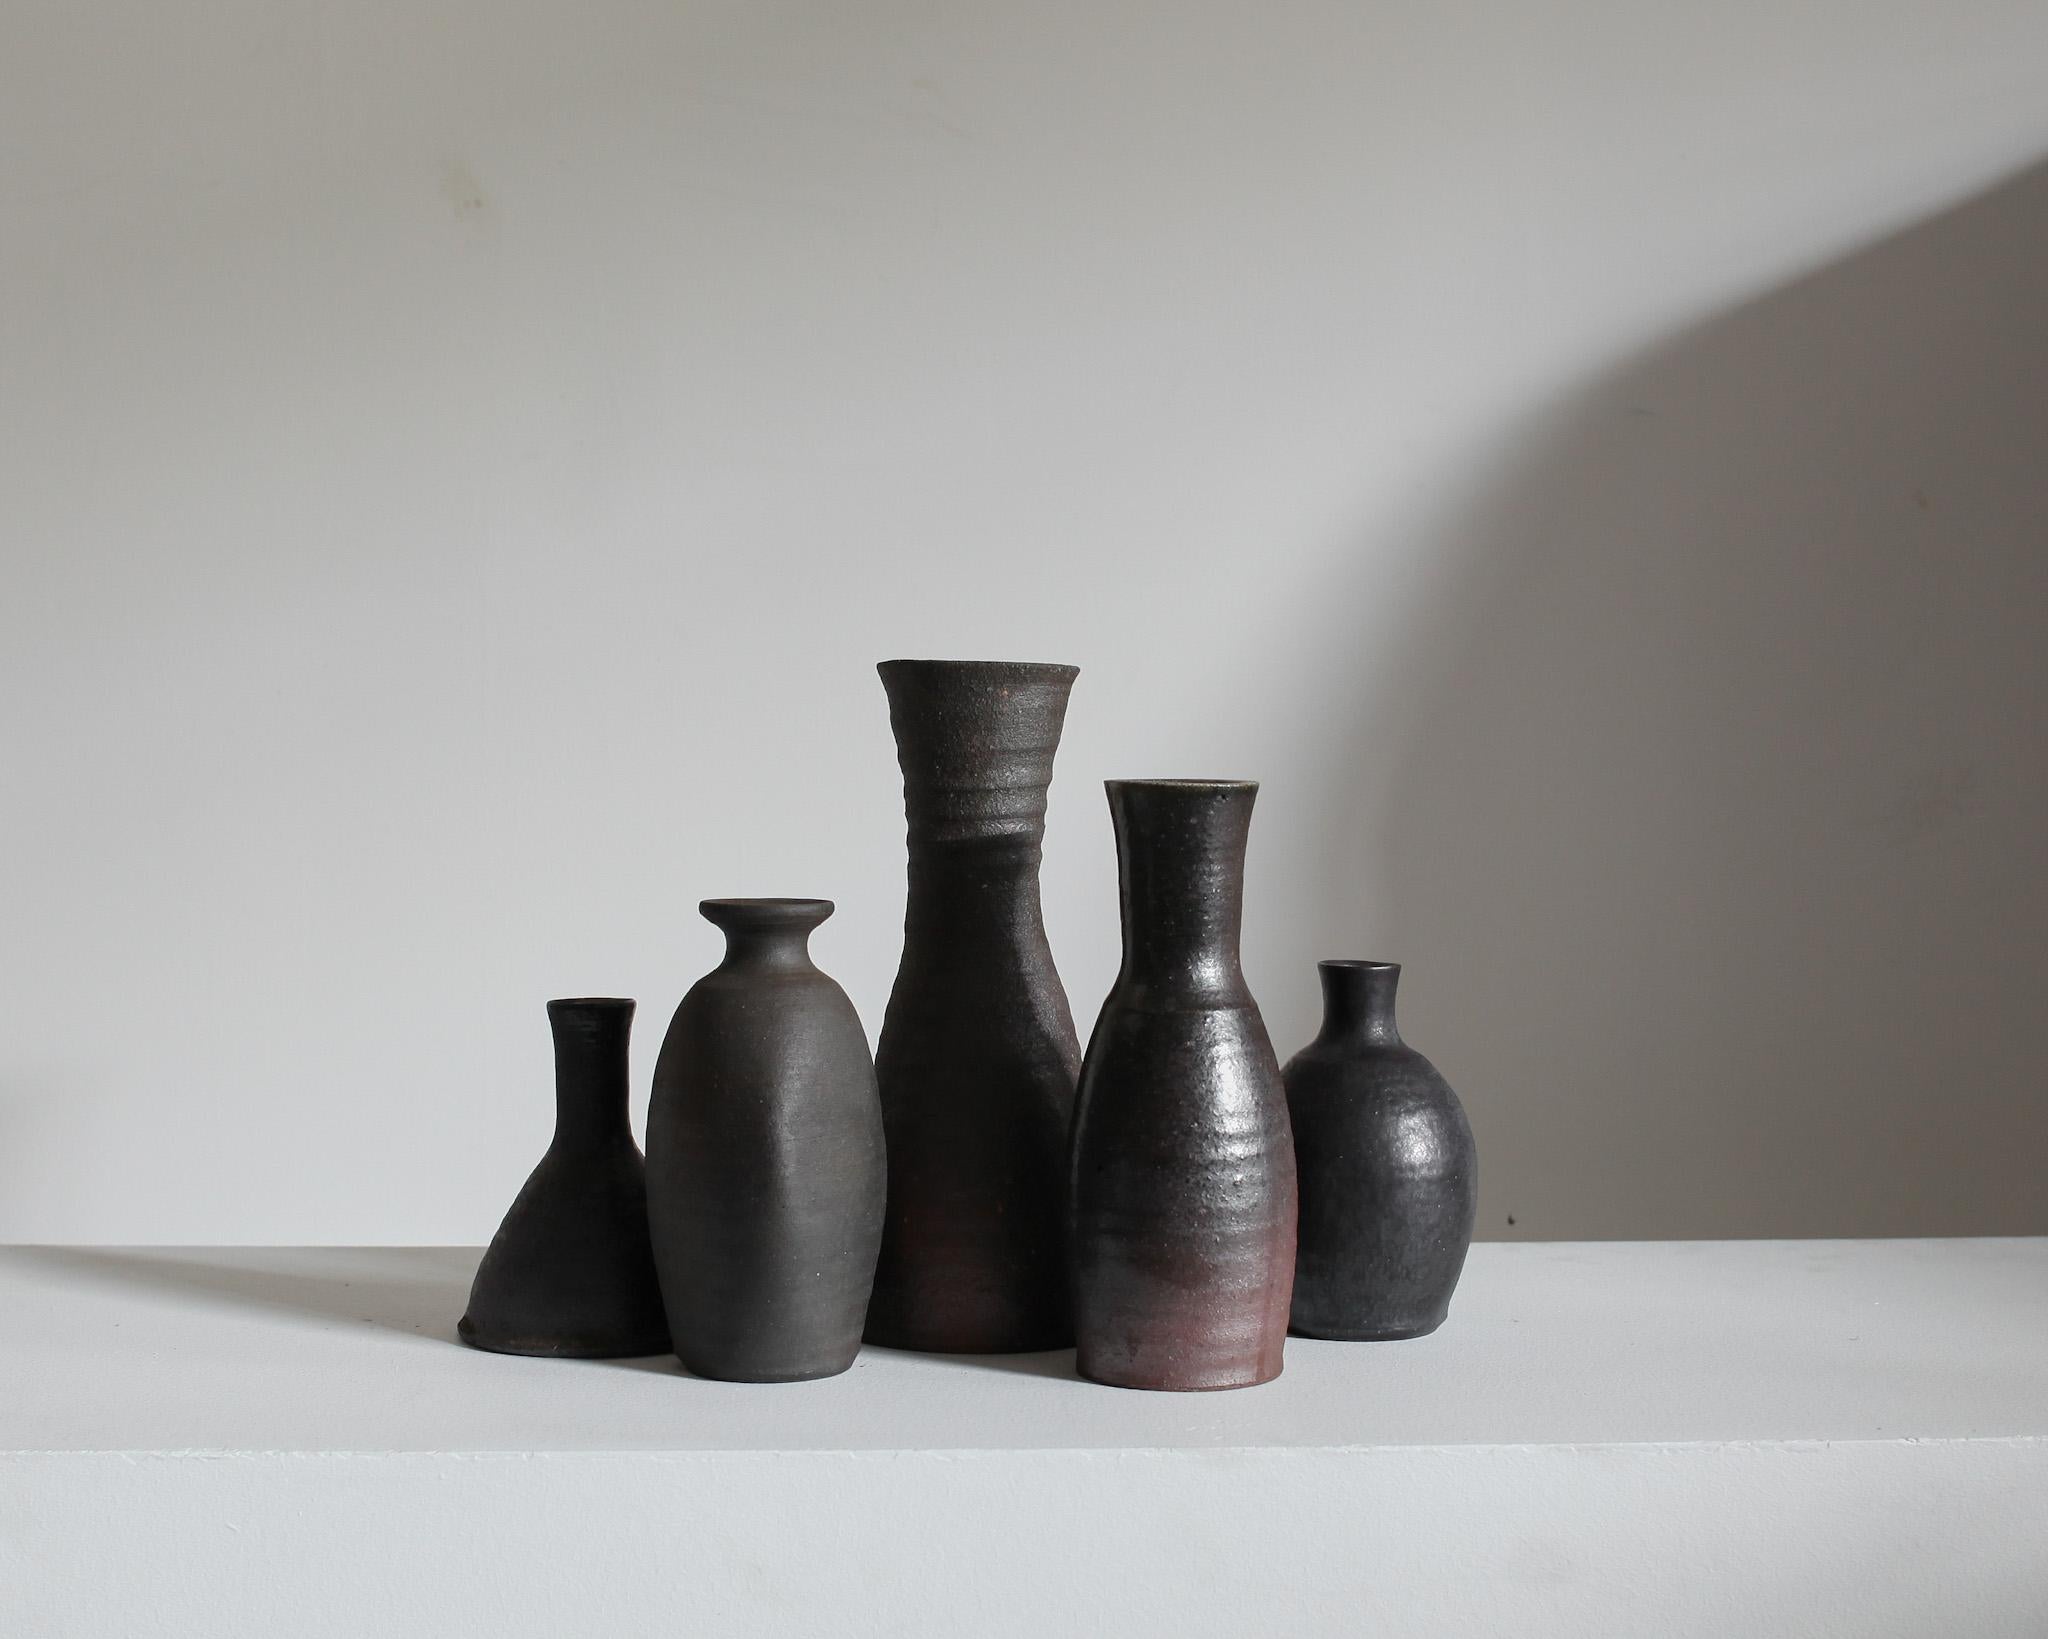 A collection of five unique blackened stoneware/ceramic vessels from the famous pottery town of Mashiko, Japan.

Sourced from the former studio of a Mashiko lifetime potter.

These tactile vessels all display an earthy wabi-sabi aesthetic.

Most of